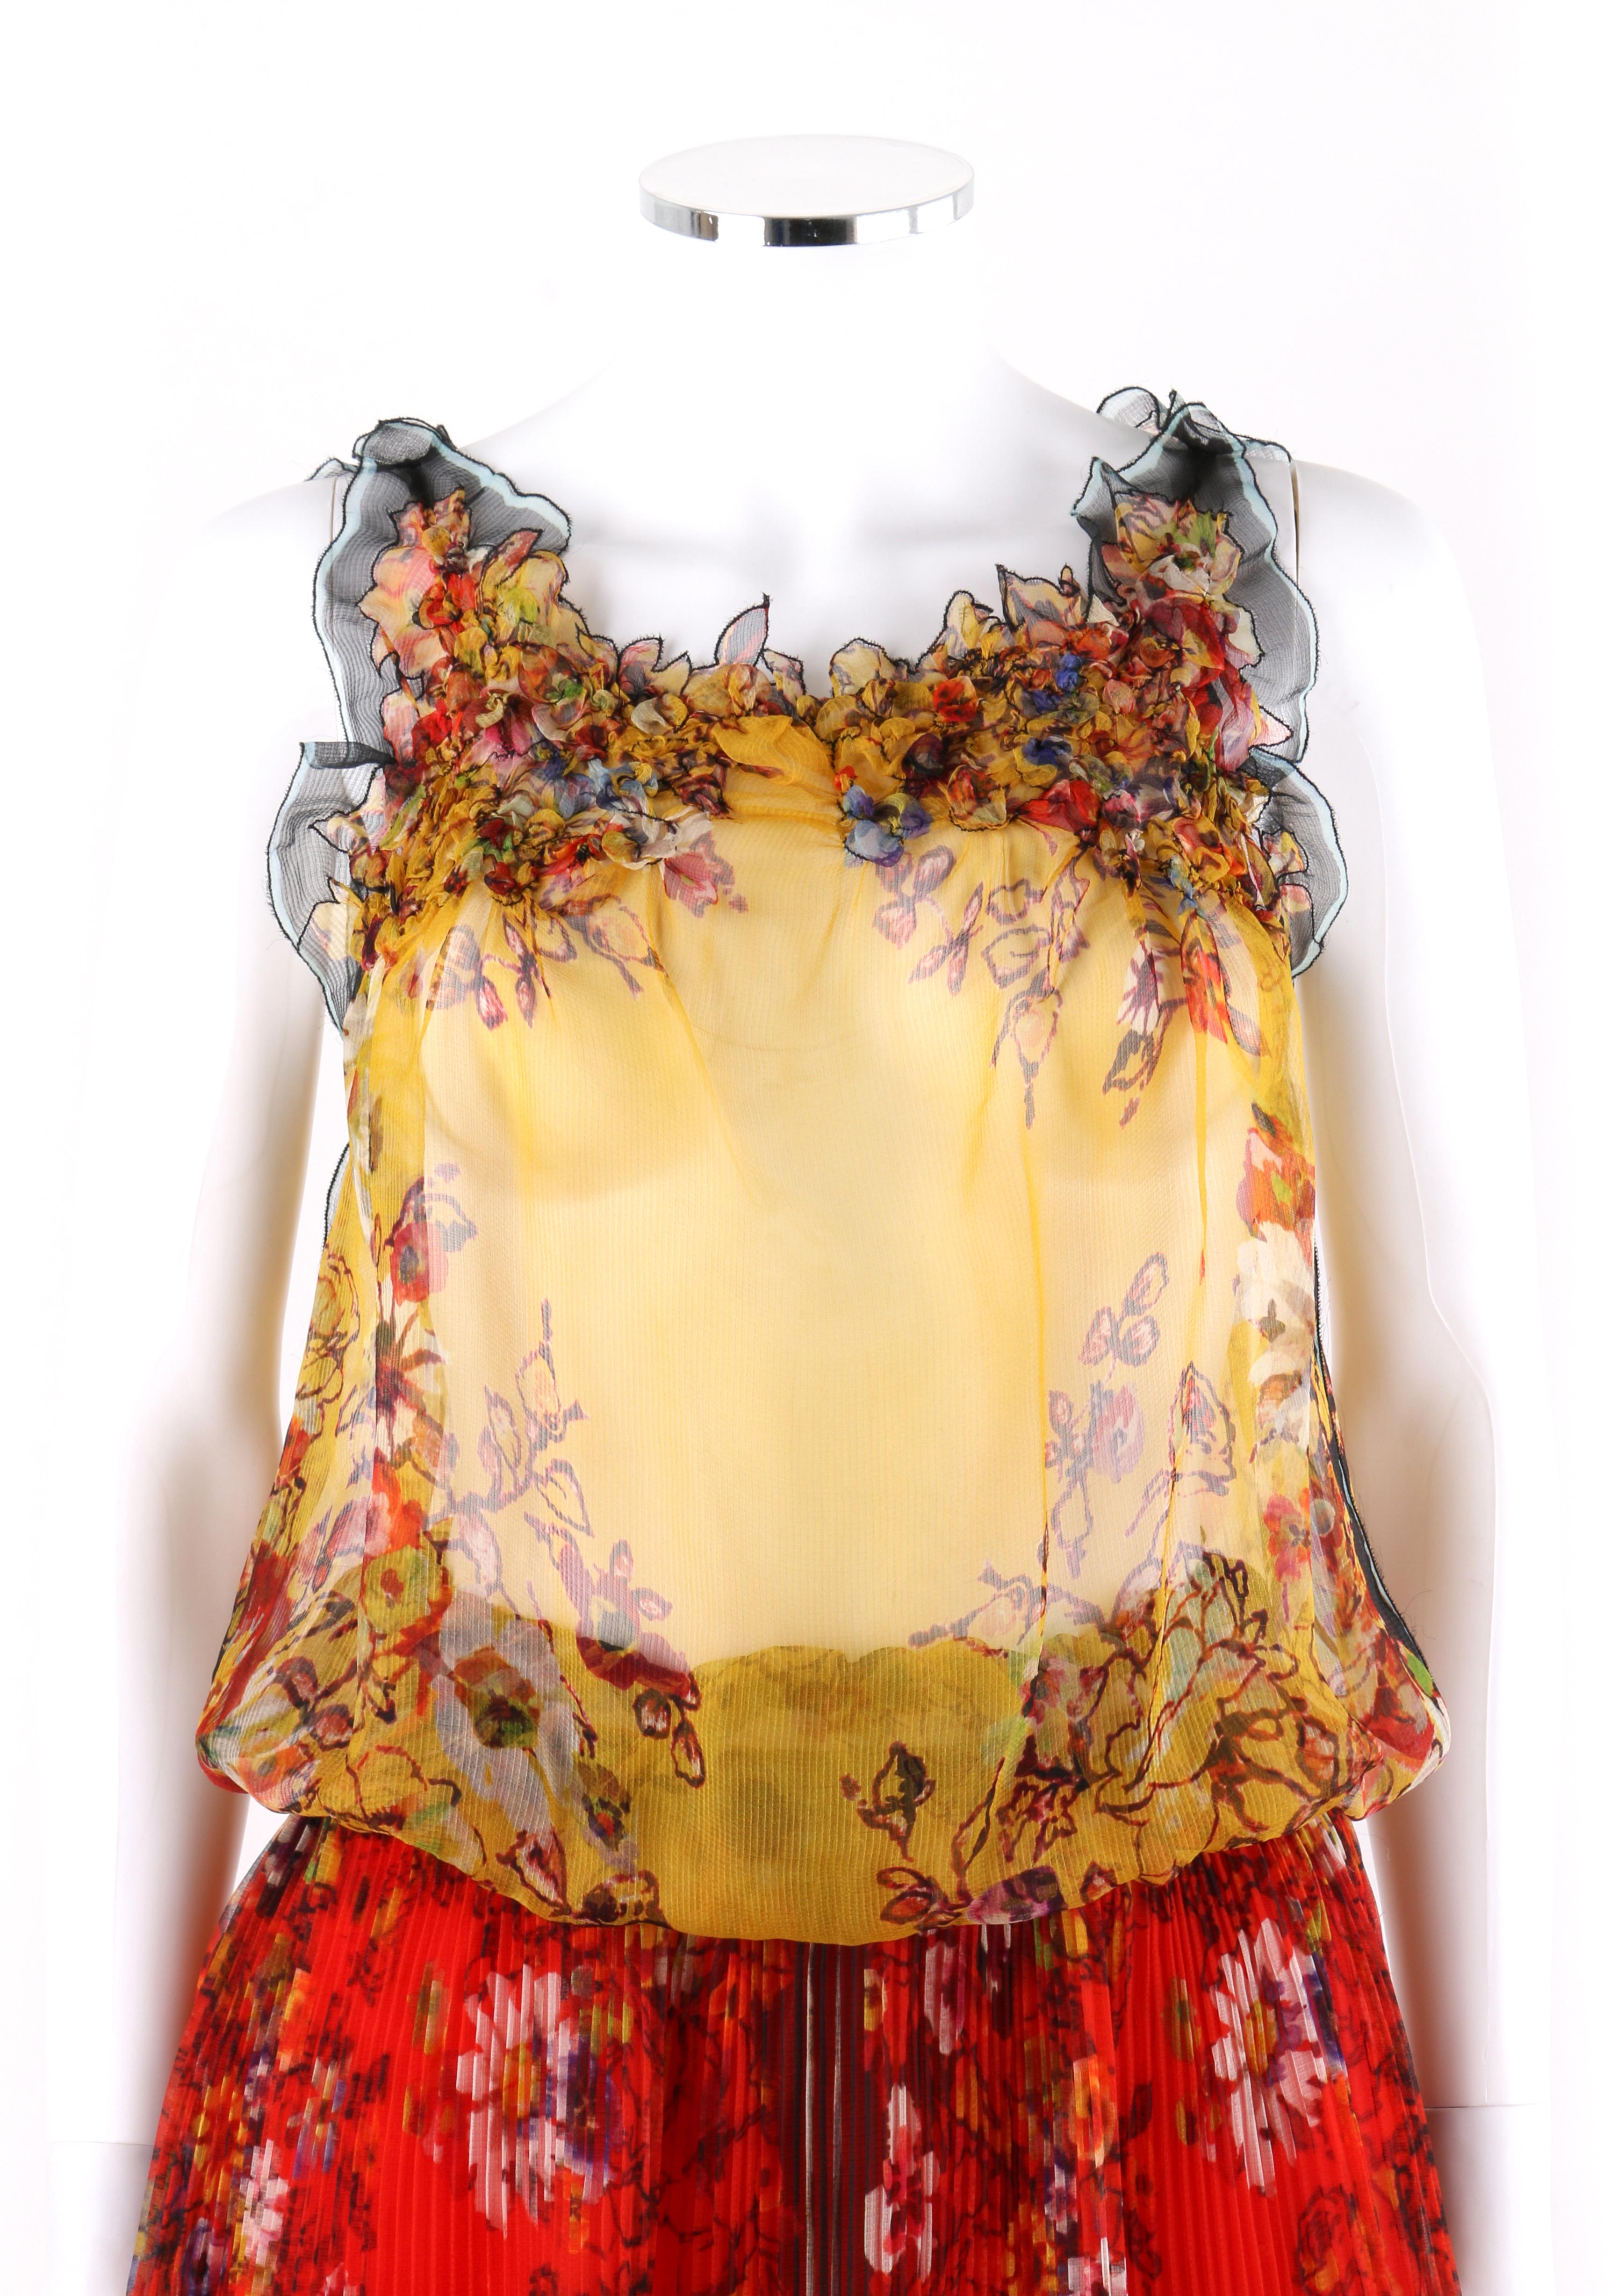 DESCRIPTION: JEAN PAUL GAULTIER Femme c.2000’s 3 Pc Red Yellow Floral Tank Top Skirt Slip Dress Set 
 
Brand / Manufacturer: Jean Paul Gaultier 
Style: Blouson tank top, slip and accordion skirt. 
Color(s): Shades of red, yellow, green, blue,